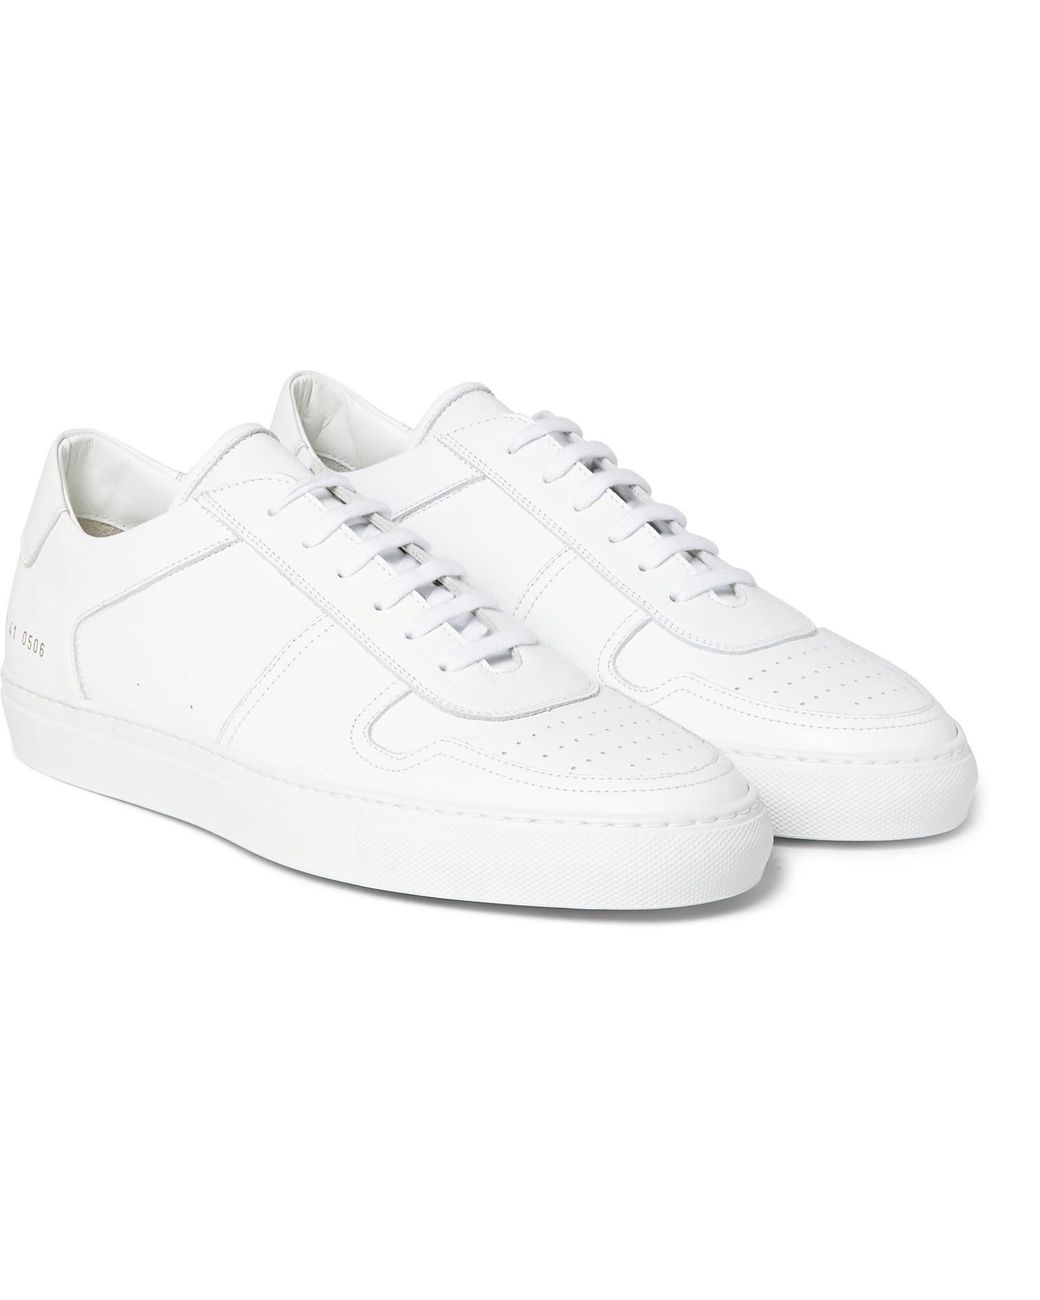 Common Projects Bball Leather Sneakers in White for Men - Lyst